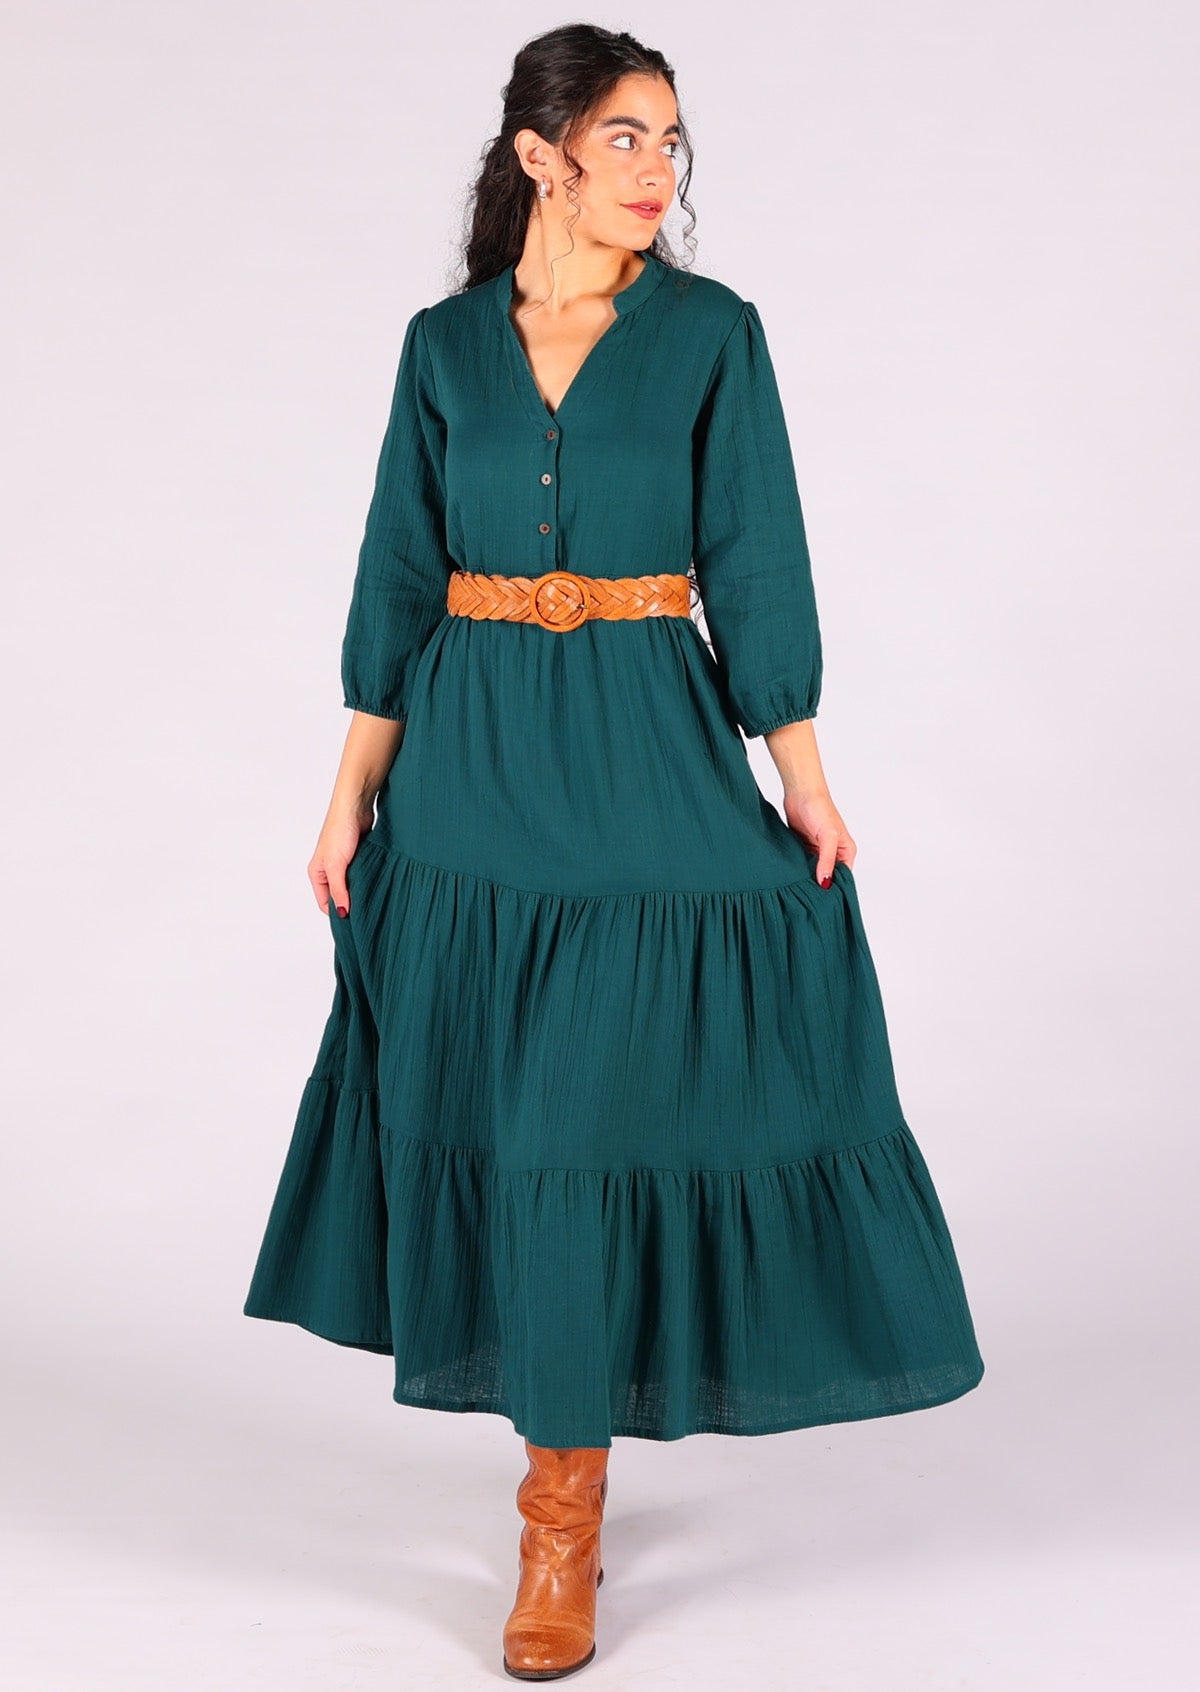 Model wears gorgeous double cotton boho tiered maxi dress with belt cinching the waist